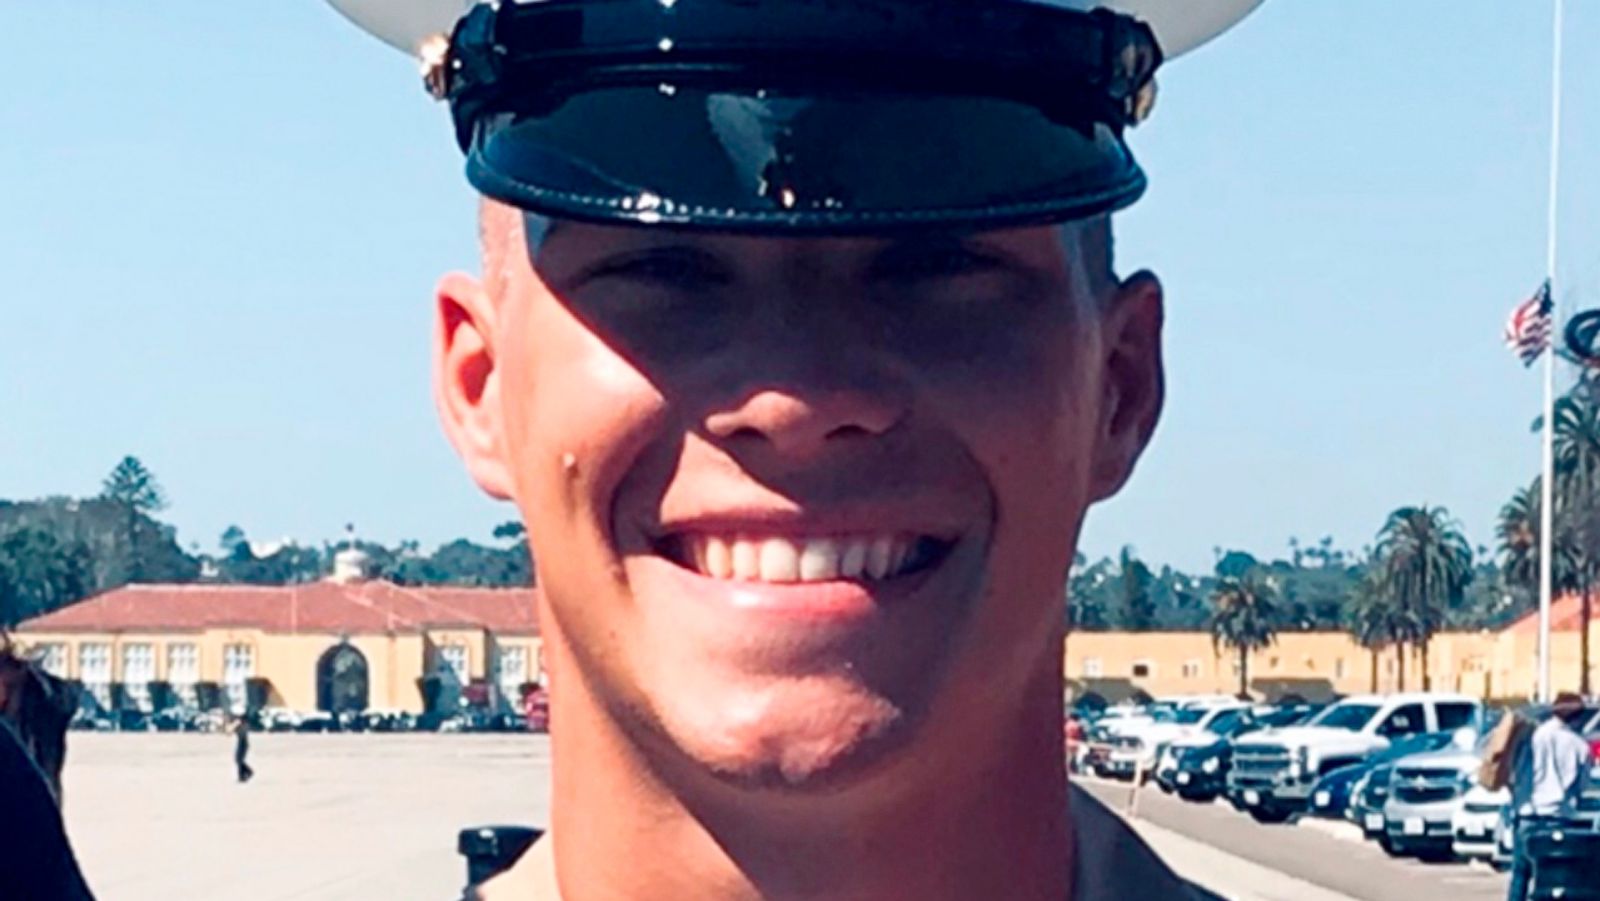 Terrible Loss Marine Shot And Killed In Apparent Accident In Washington Dc Identified As Lance Cpl Riley Kuznia Abc News